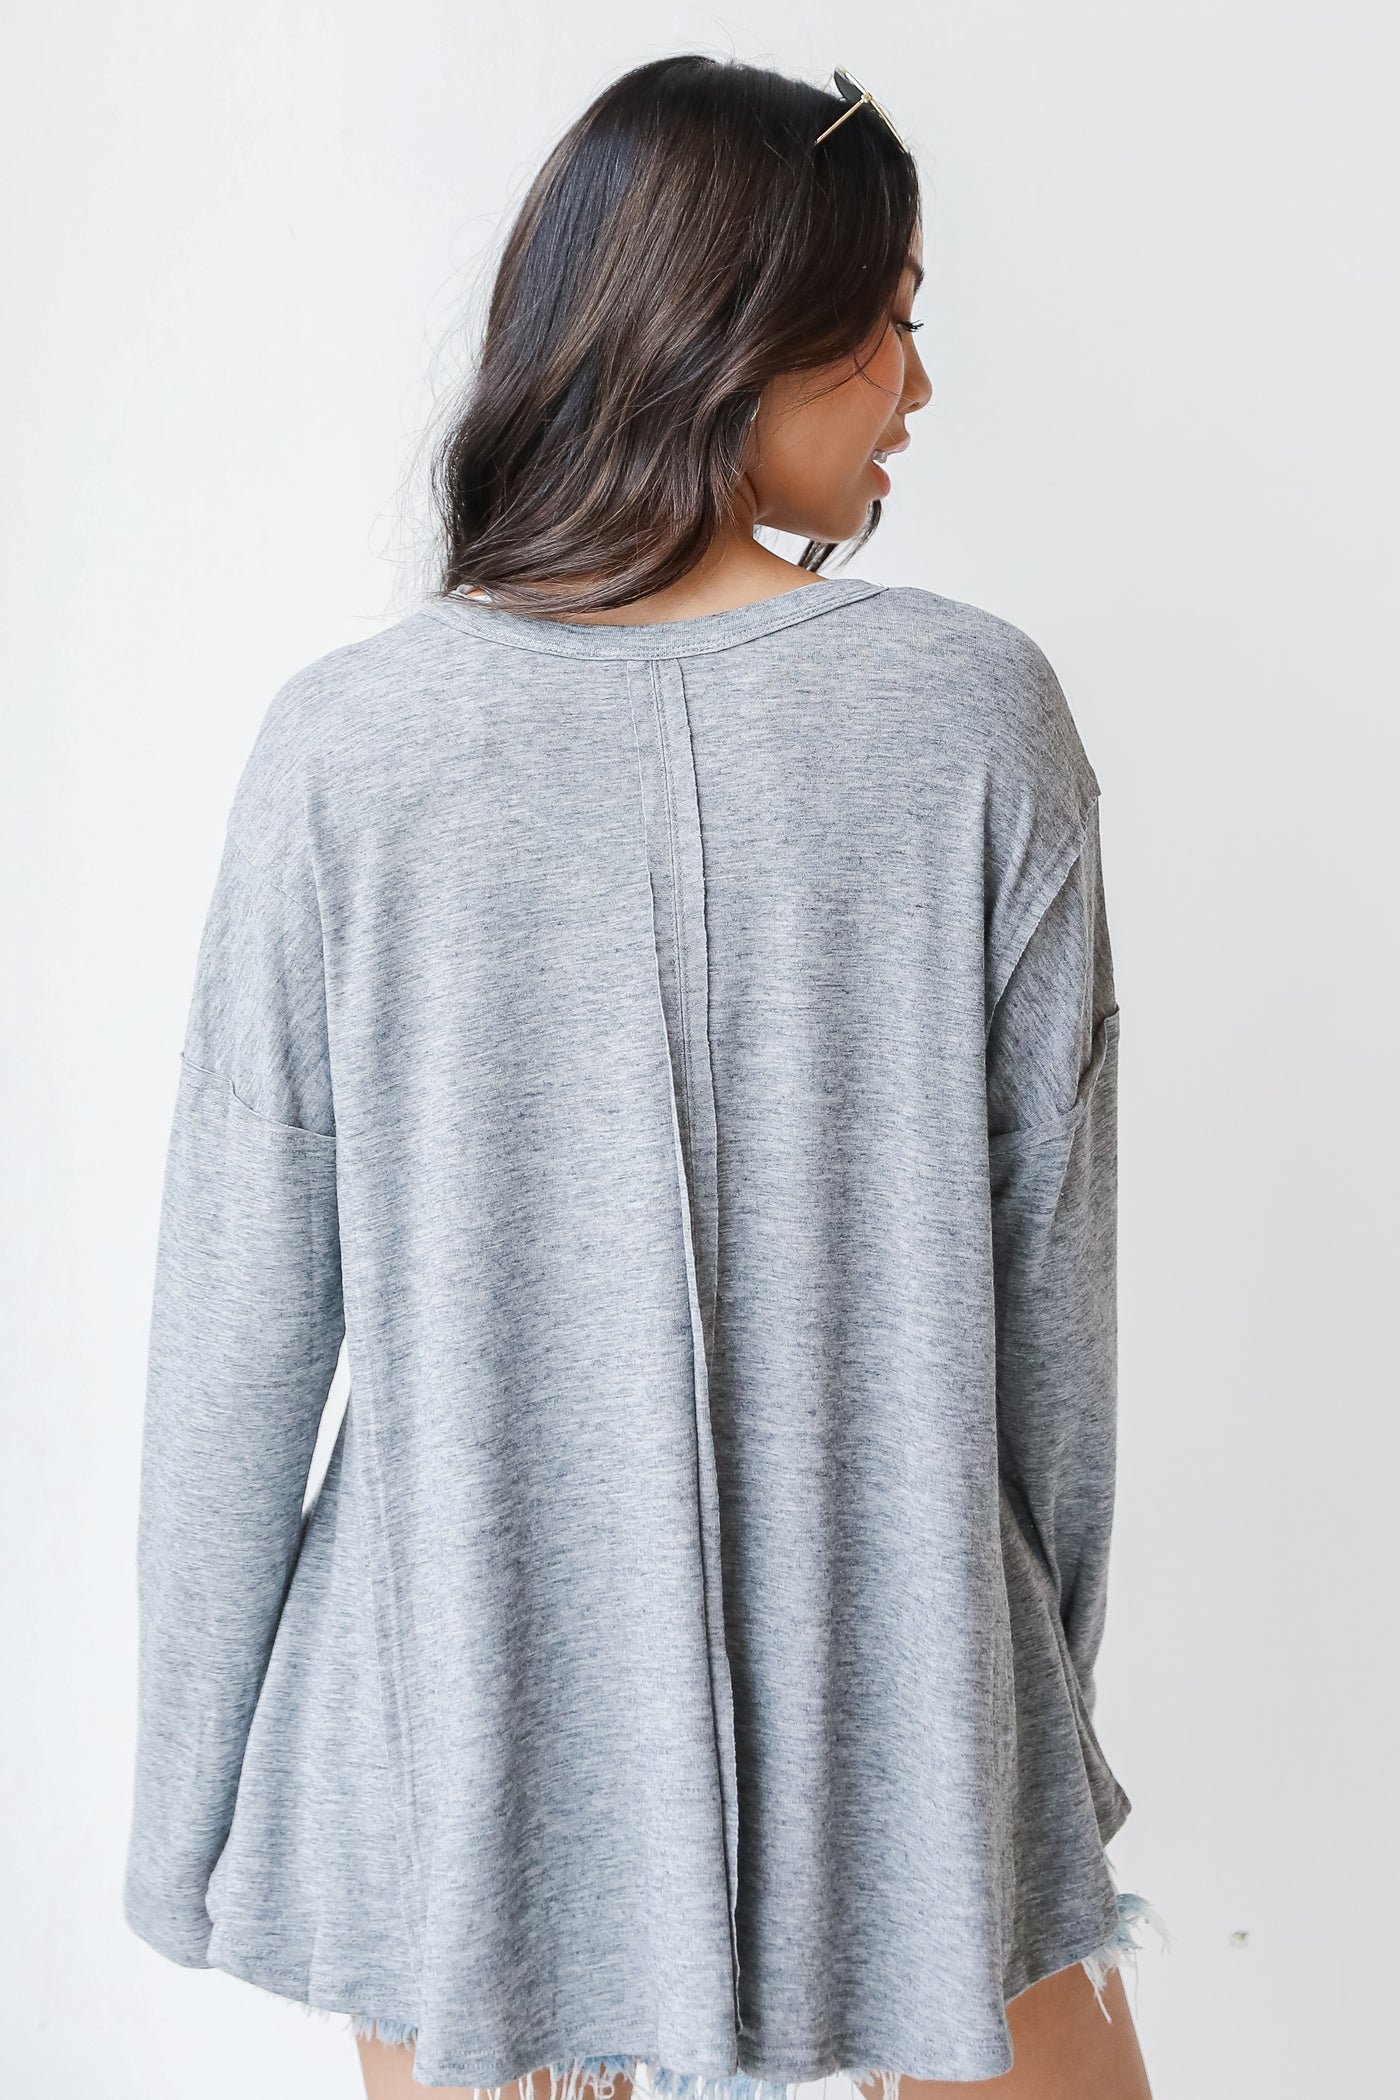 Jersey Knit Top in charcoal back view